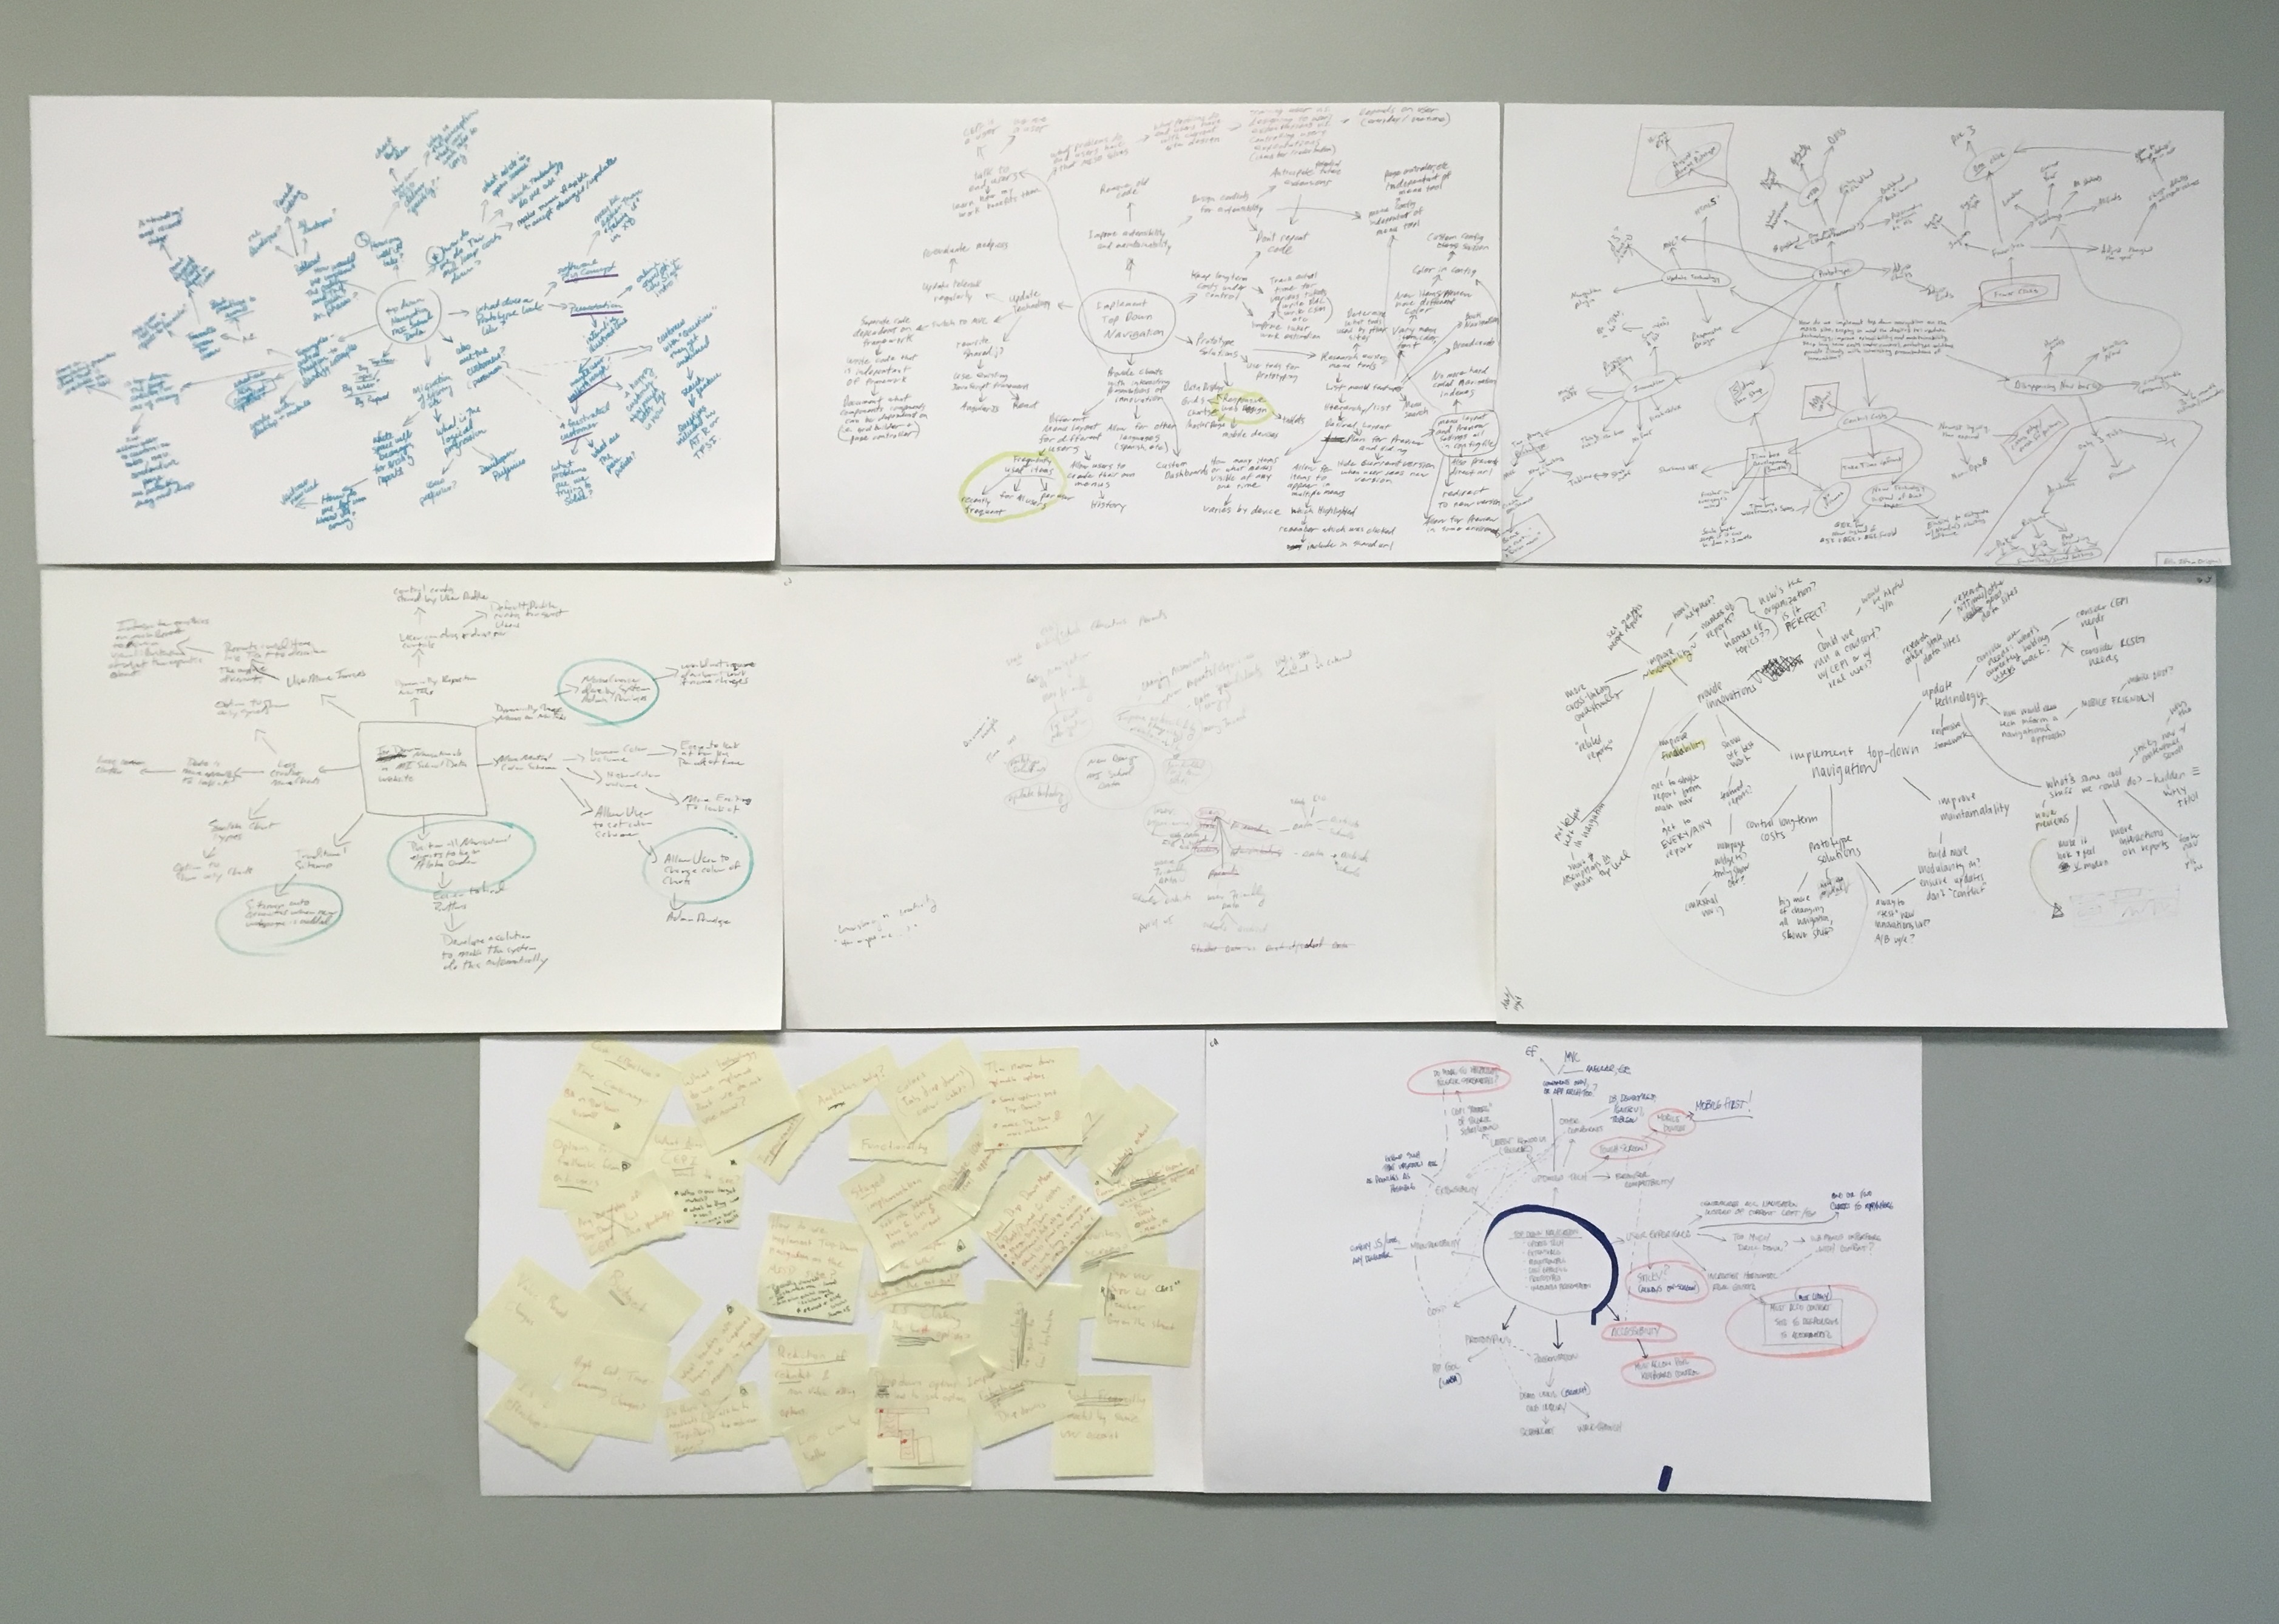 eight different people's approaches on creative mapping, displayed on papers against a wall